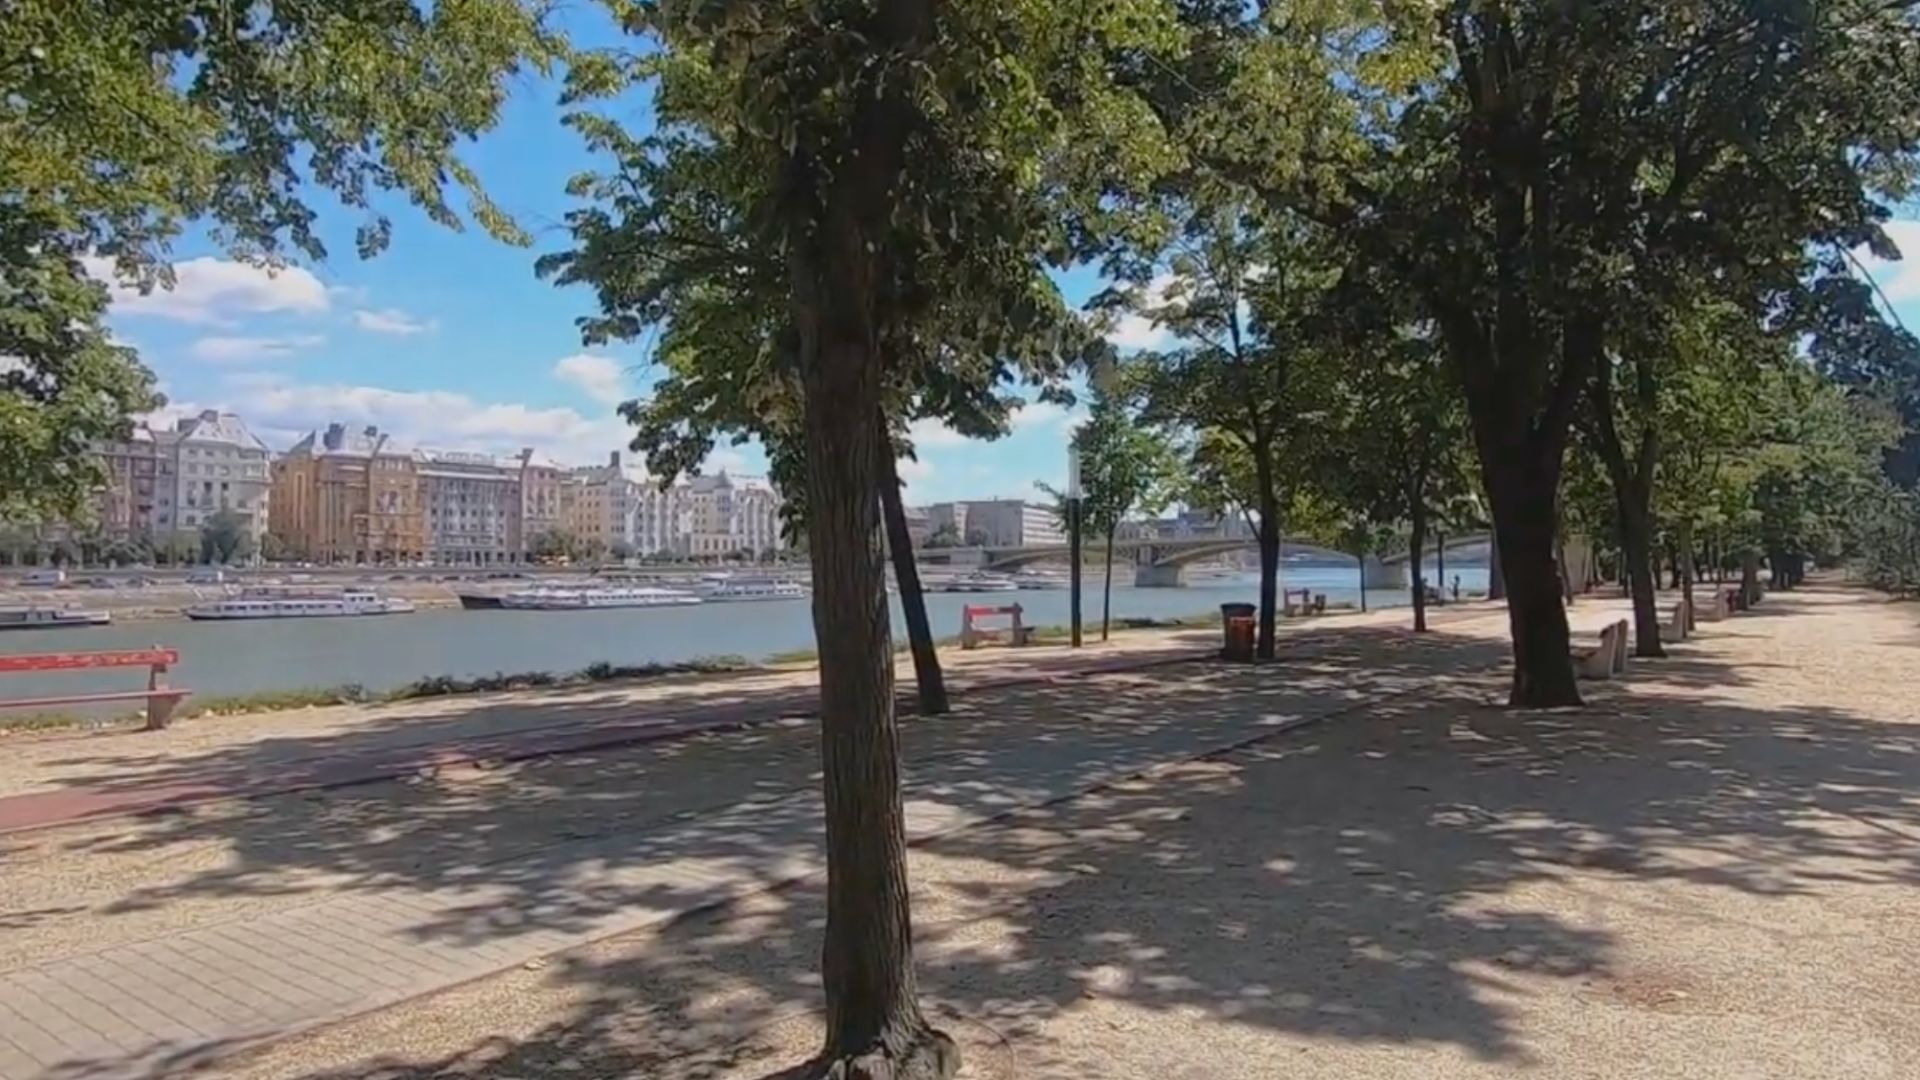 A view of a riverside running track on Margaret Island in Budapest, with trees, benches, and buildings across the water on a sunny day.